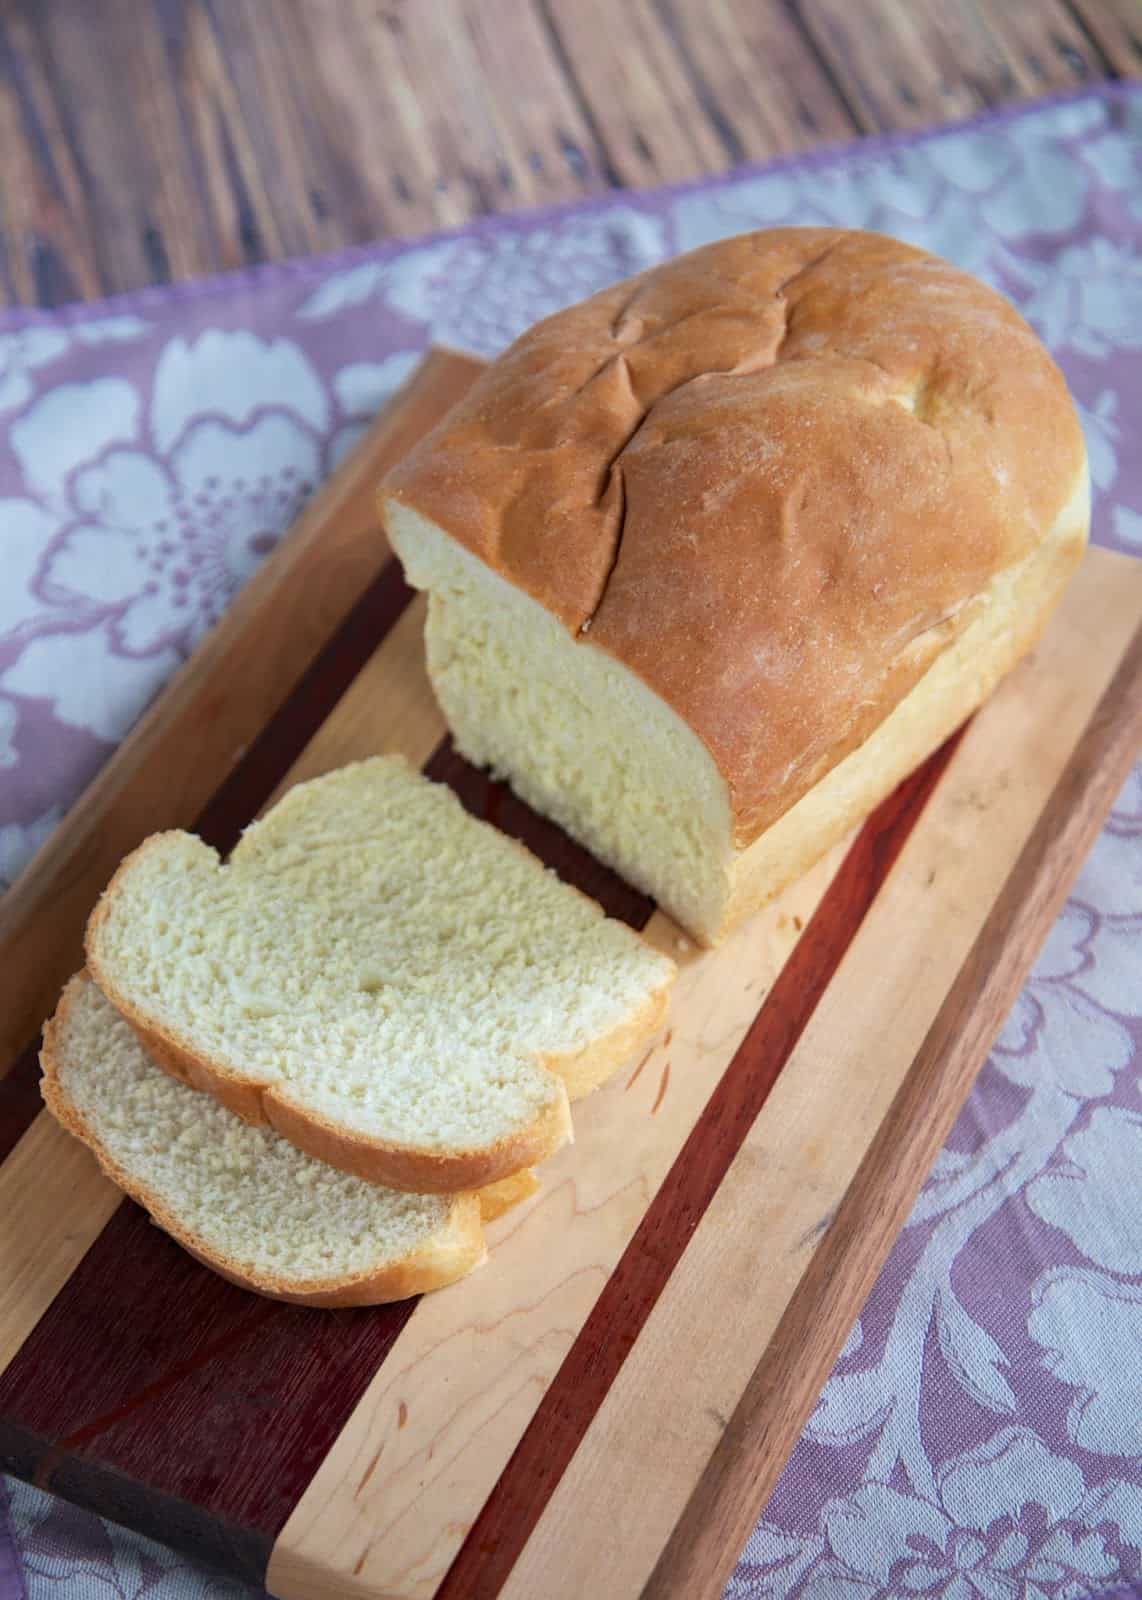 Amish White Bread - easy homemade bread recipe that tastes DELICIOUS!!! Recipe makes two loaves. Can eat one and freezer one for later. Water, sugar, yeast, salt, oil and flour. Ready to eat in about 2 hours!! #bread #homemadebread